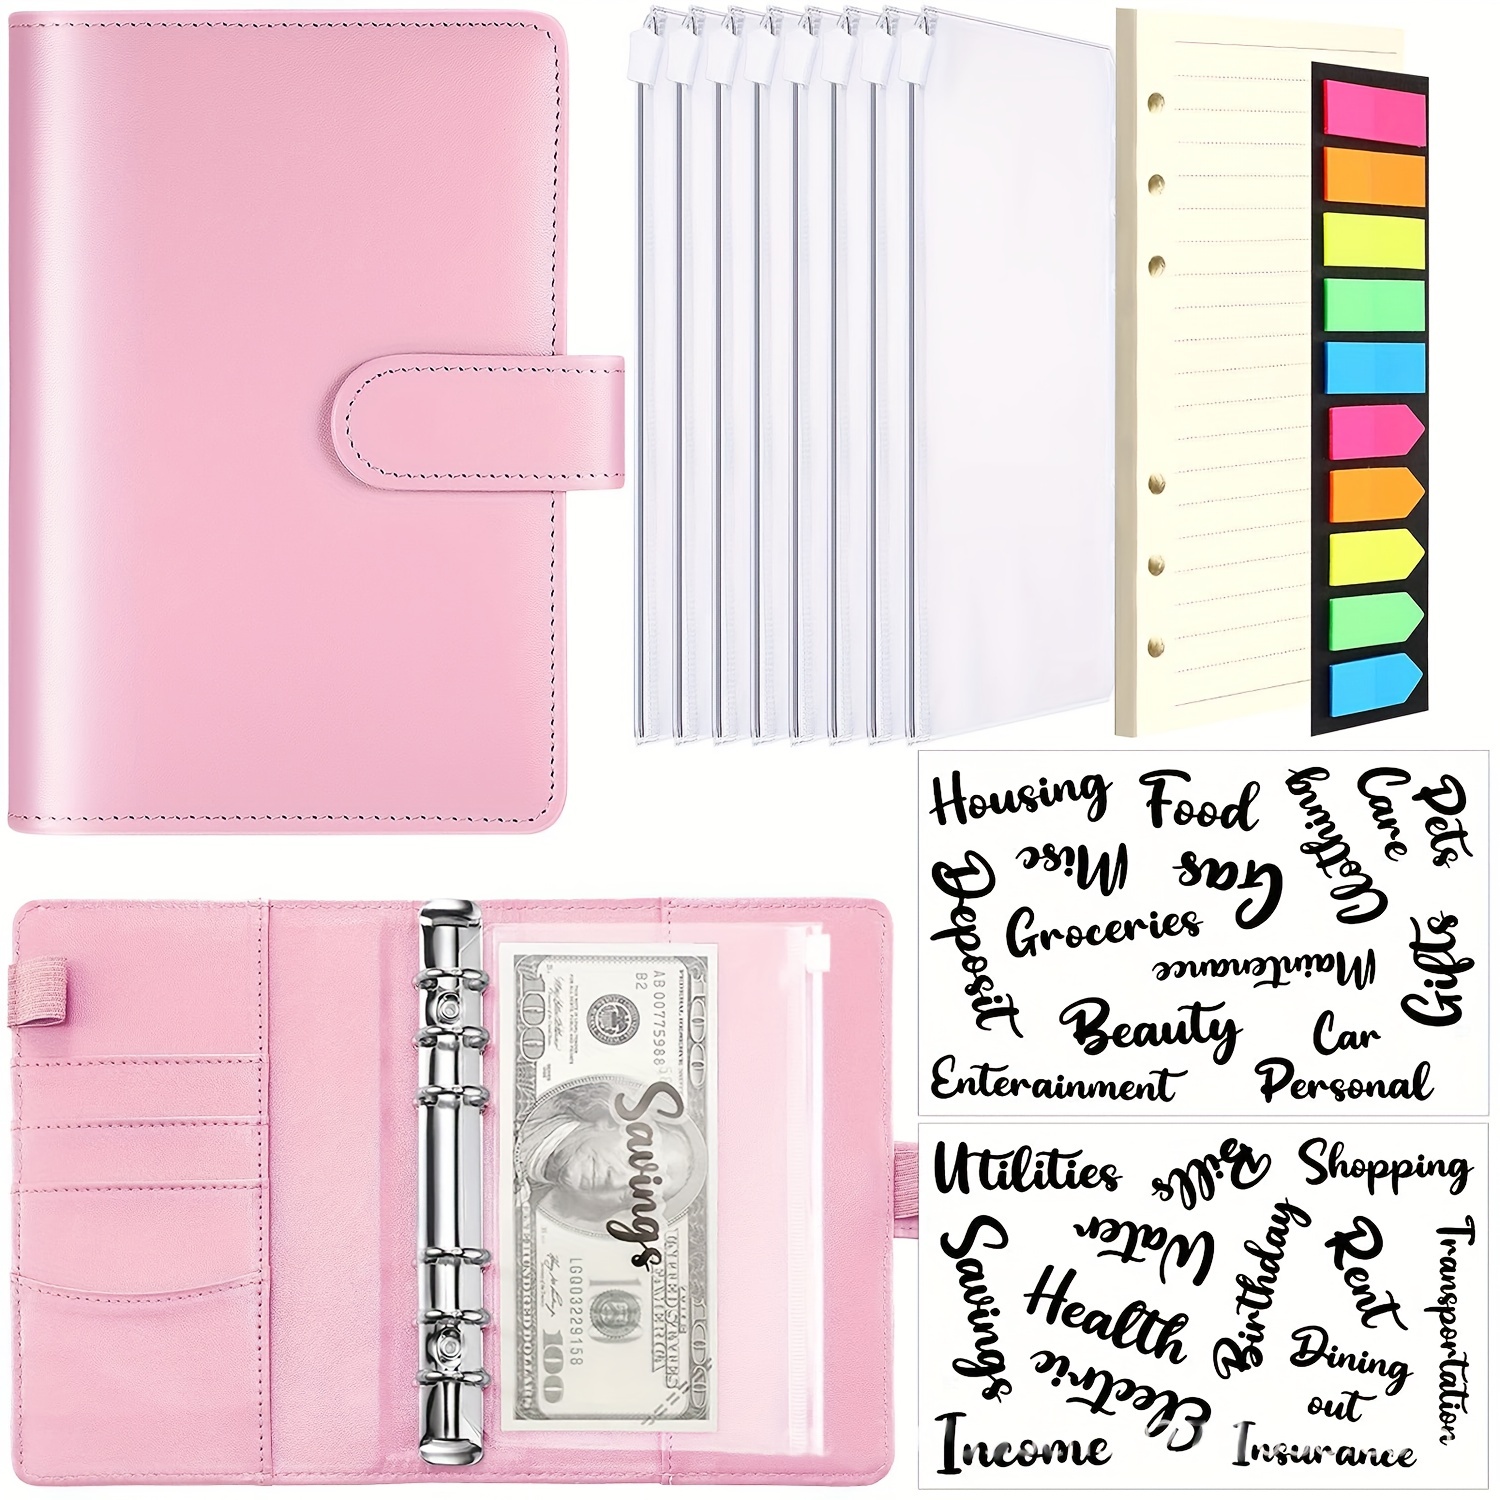 A7 Binder Wallet with Zipper Envelopes - Mini Money Organizer for Saving,  Budget Cash Envelope System, Ring Binder with Pockets, Sheets and Stickers